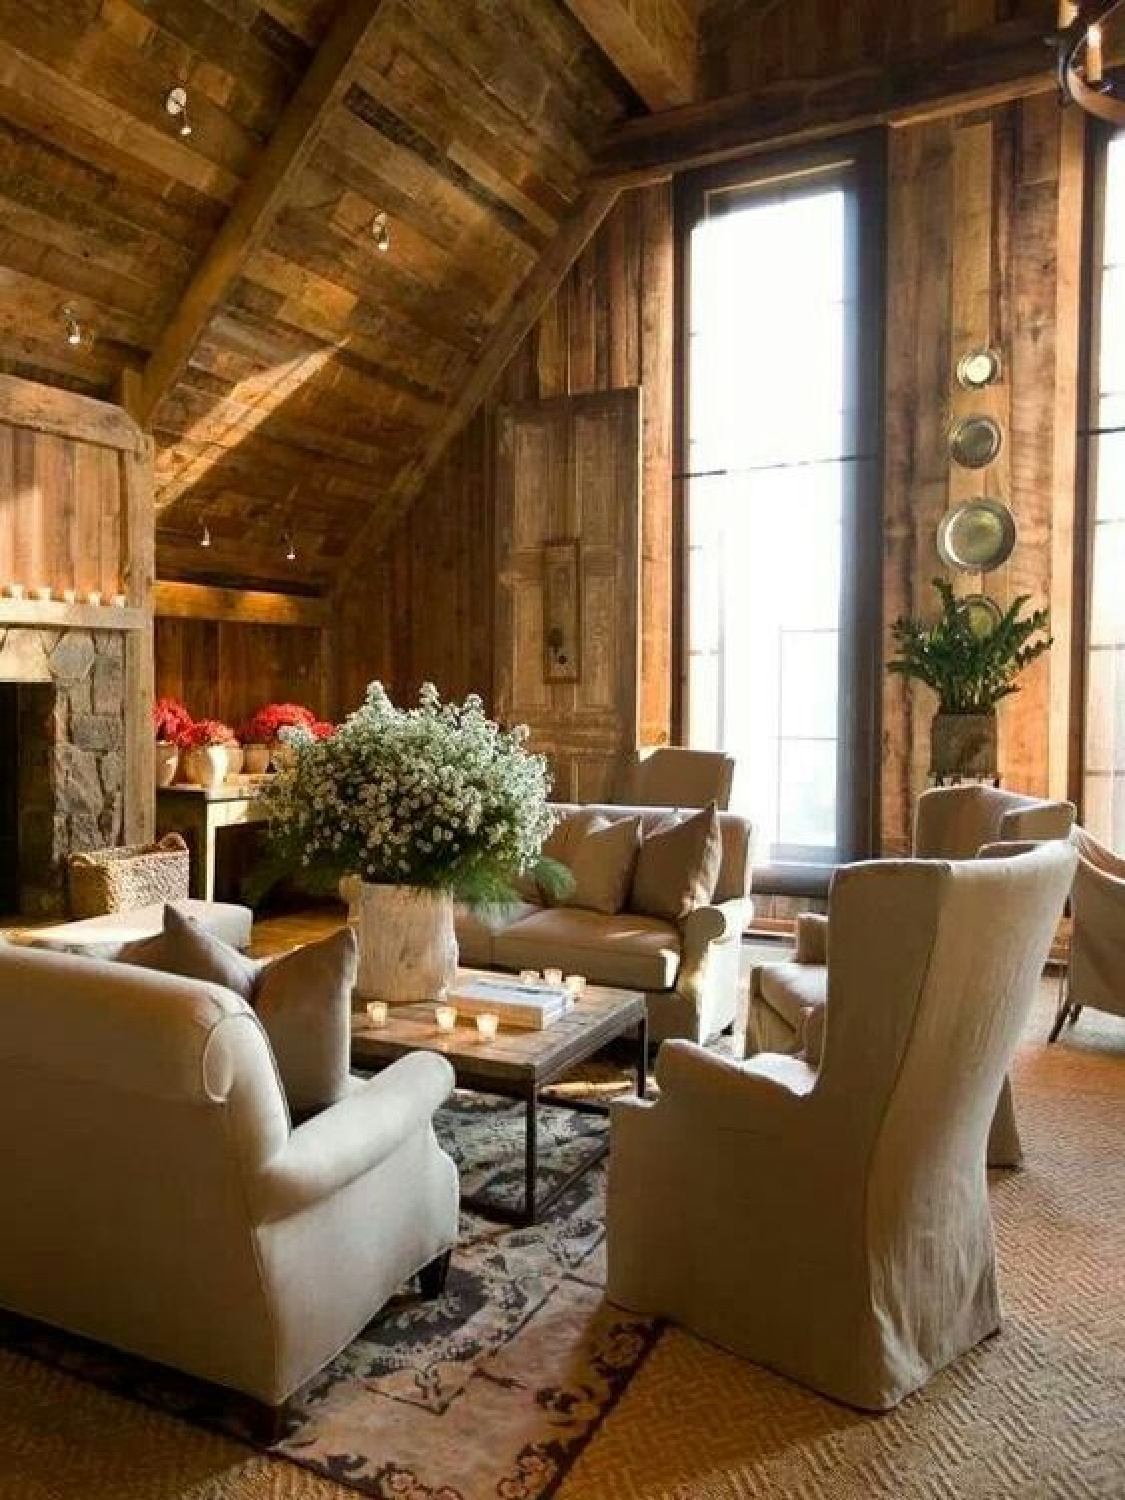 Conde Nast Traveler - rustic cozy mountain lodge retreat with warm wood and traditional details. #europeancottage #warmcozyinteriors #rusticelegance #europeancountry